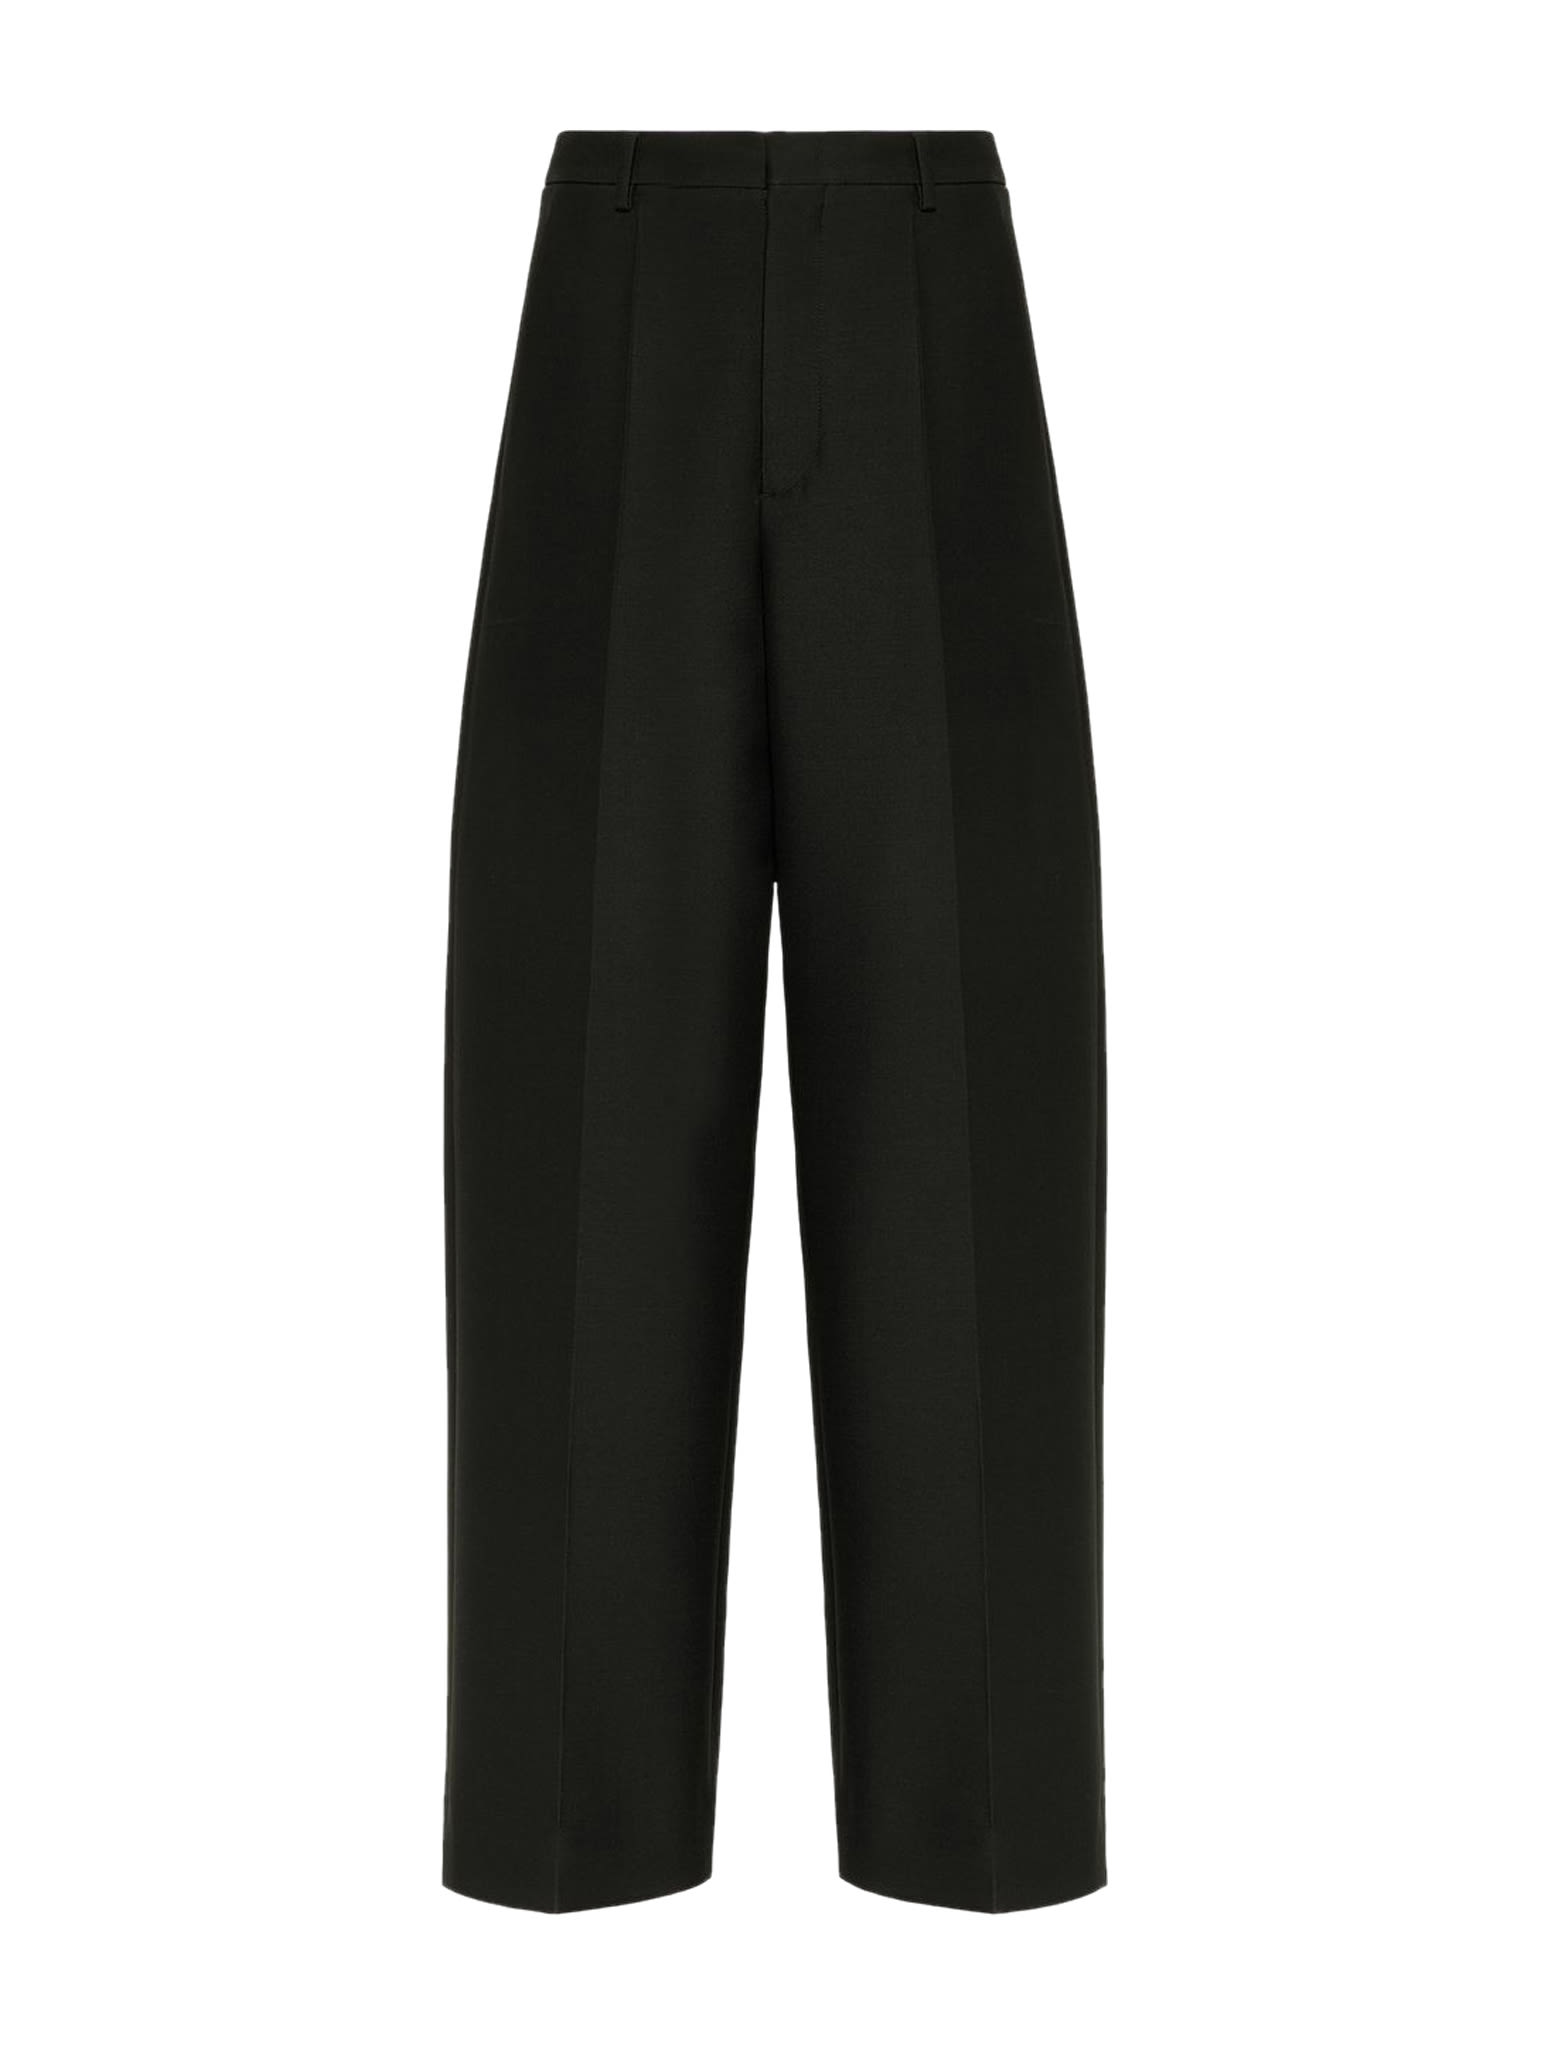 Valentino Pant Formalwear Crepe Couture